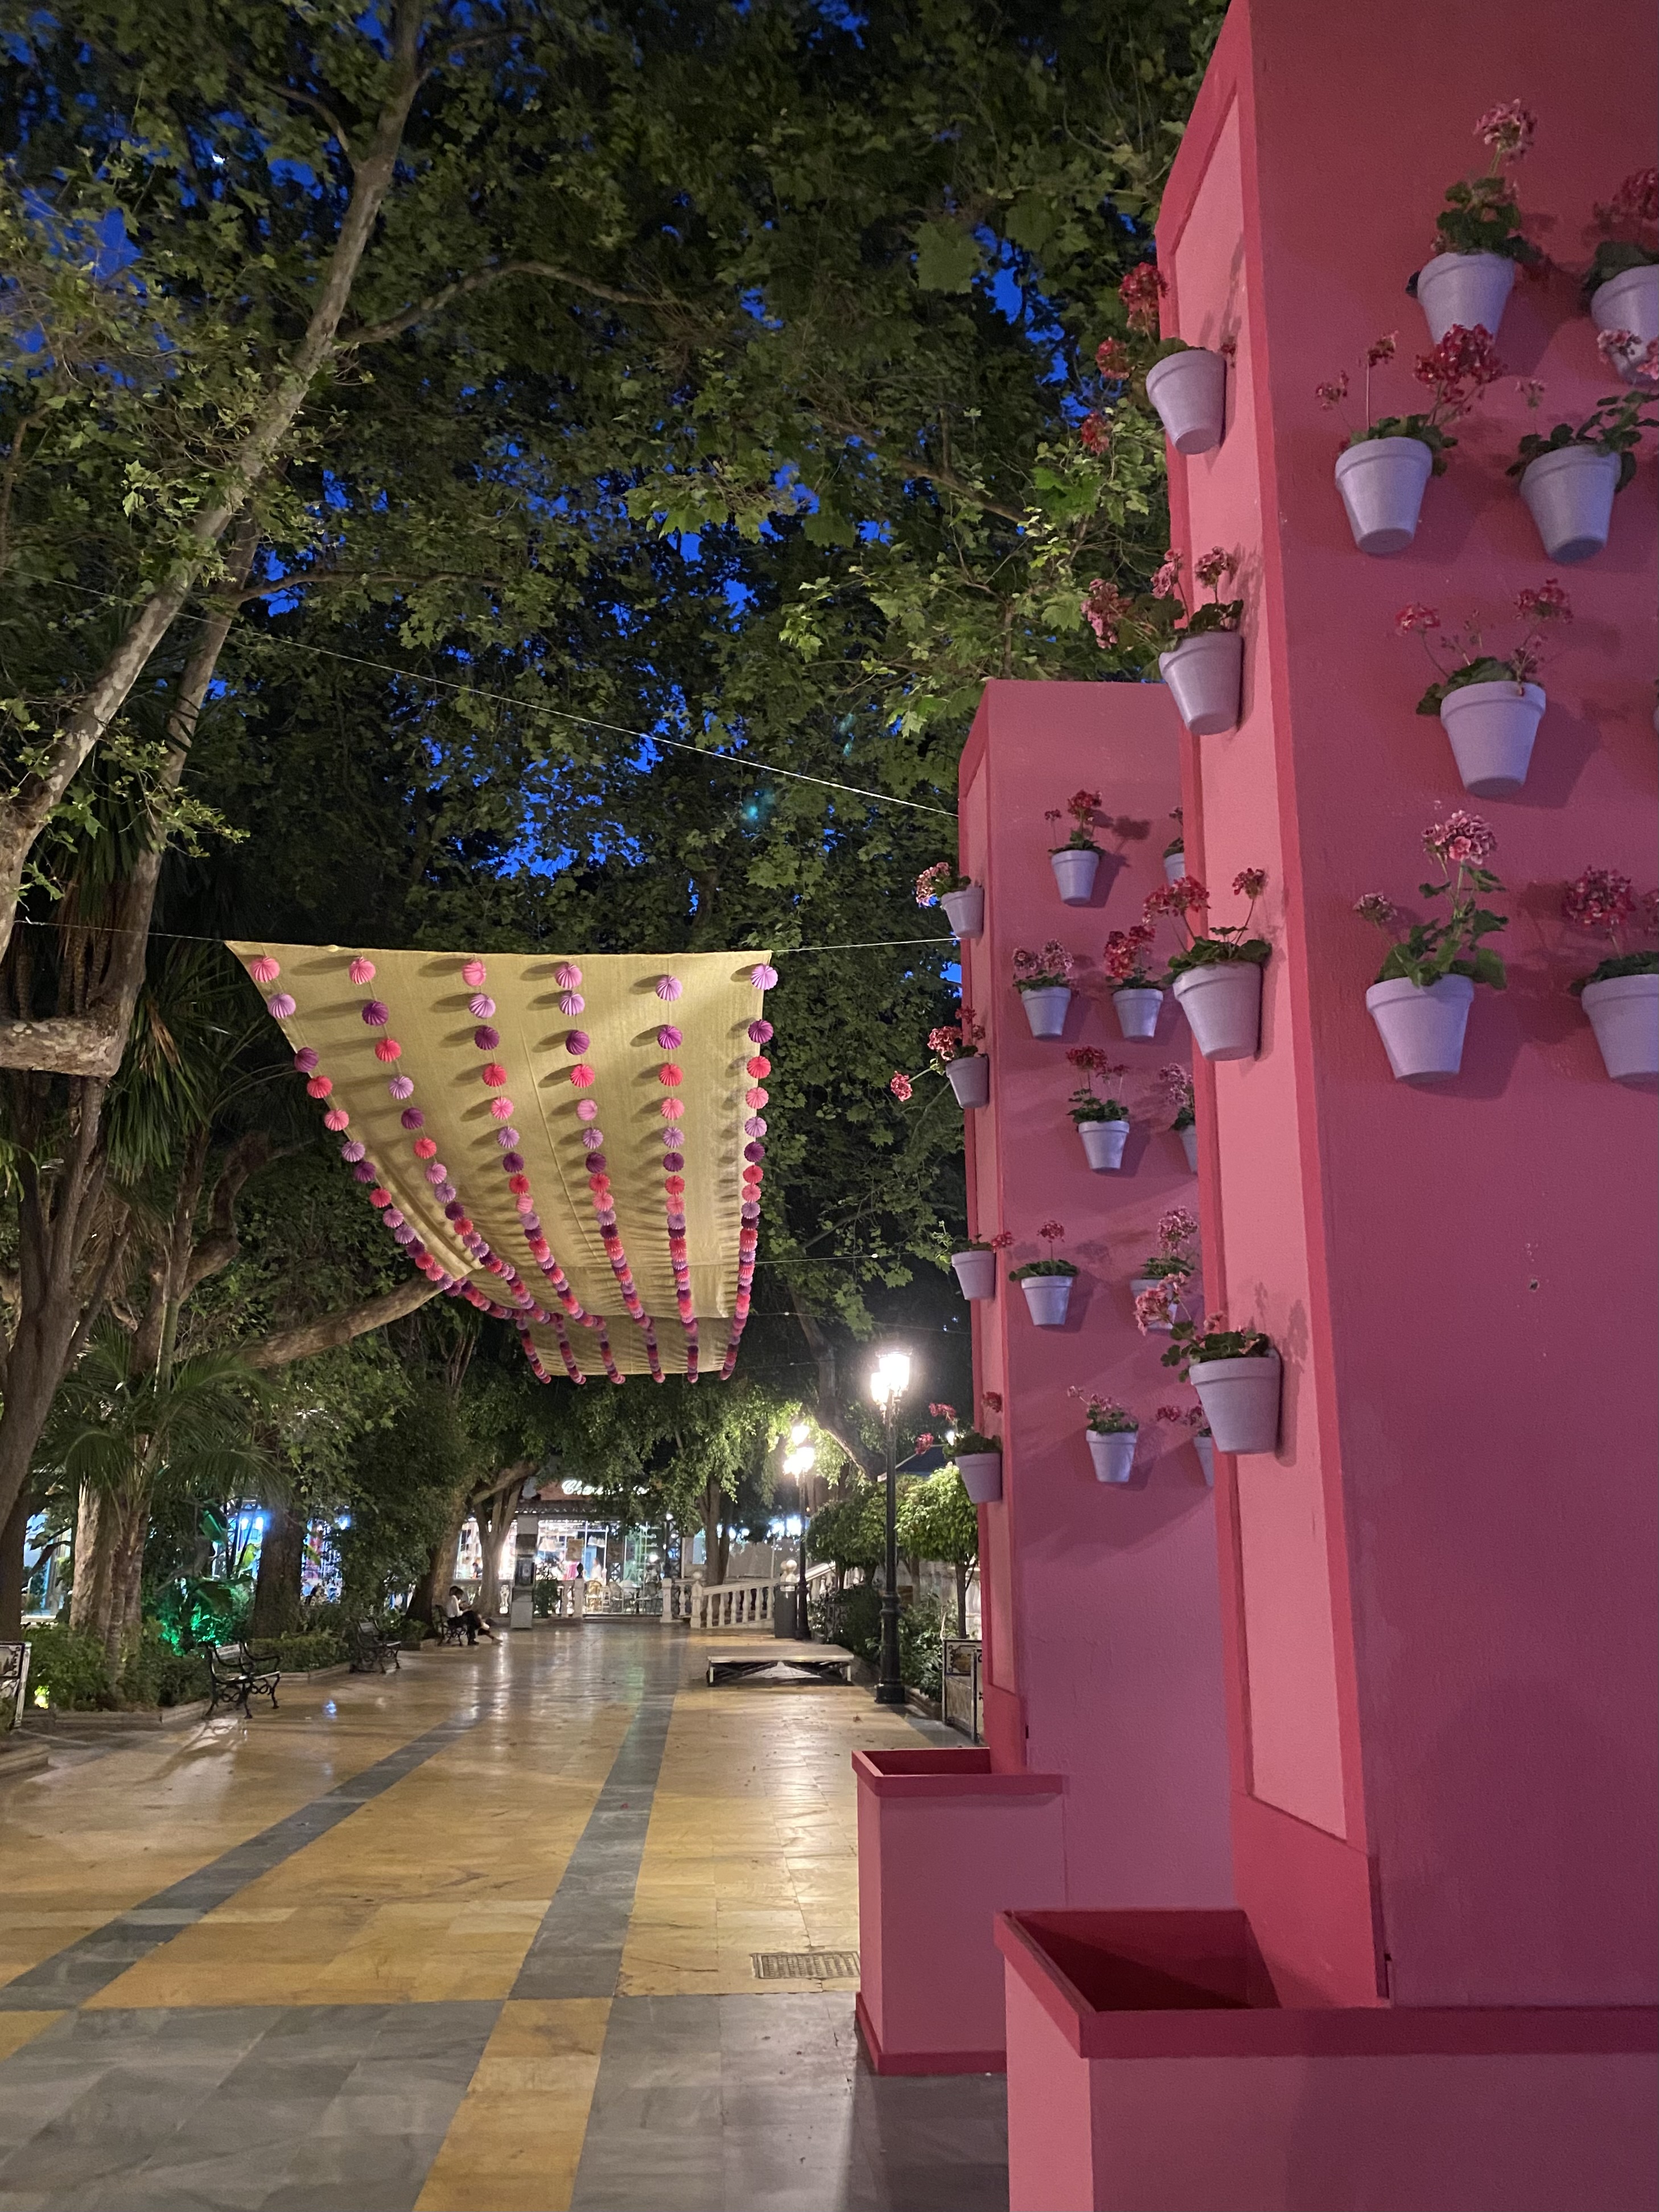 Pink pillars with potted flowers hanging on them and decorations in a Marbella park